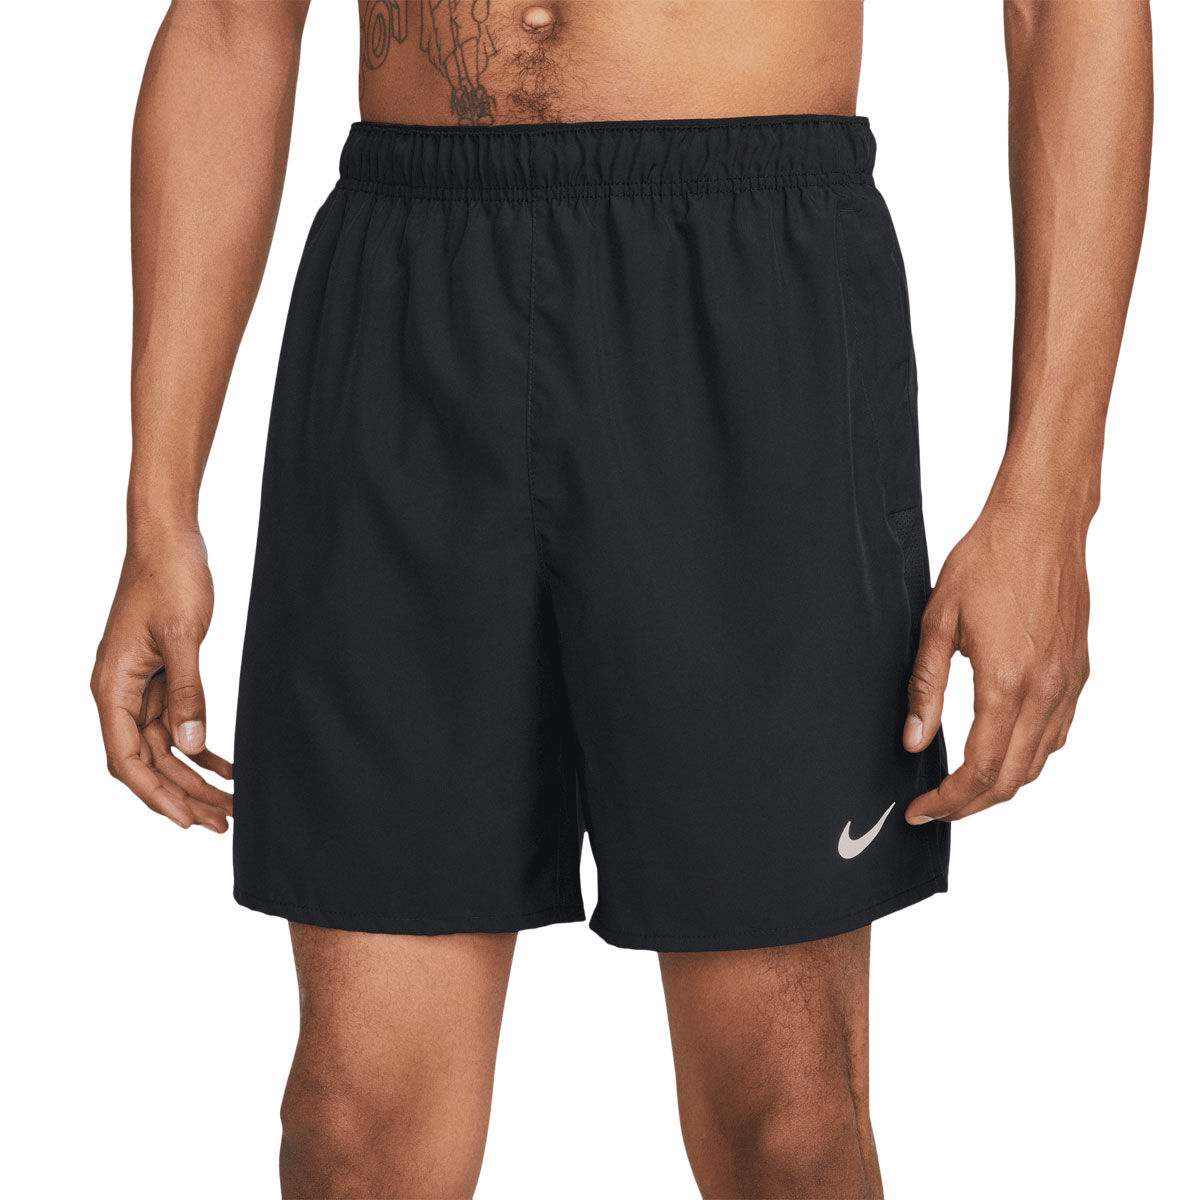 THE GYM PEOPLE Men's Lounge Shorts with Deep Pockets Loose-fit Jersey Shorts  for